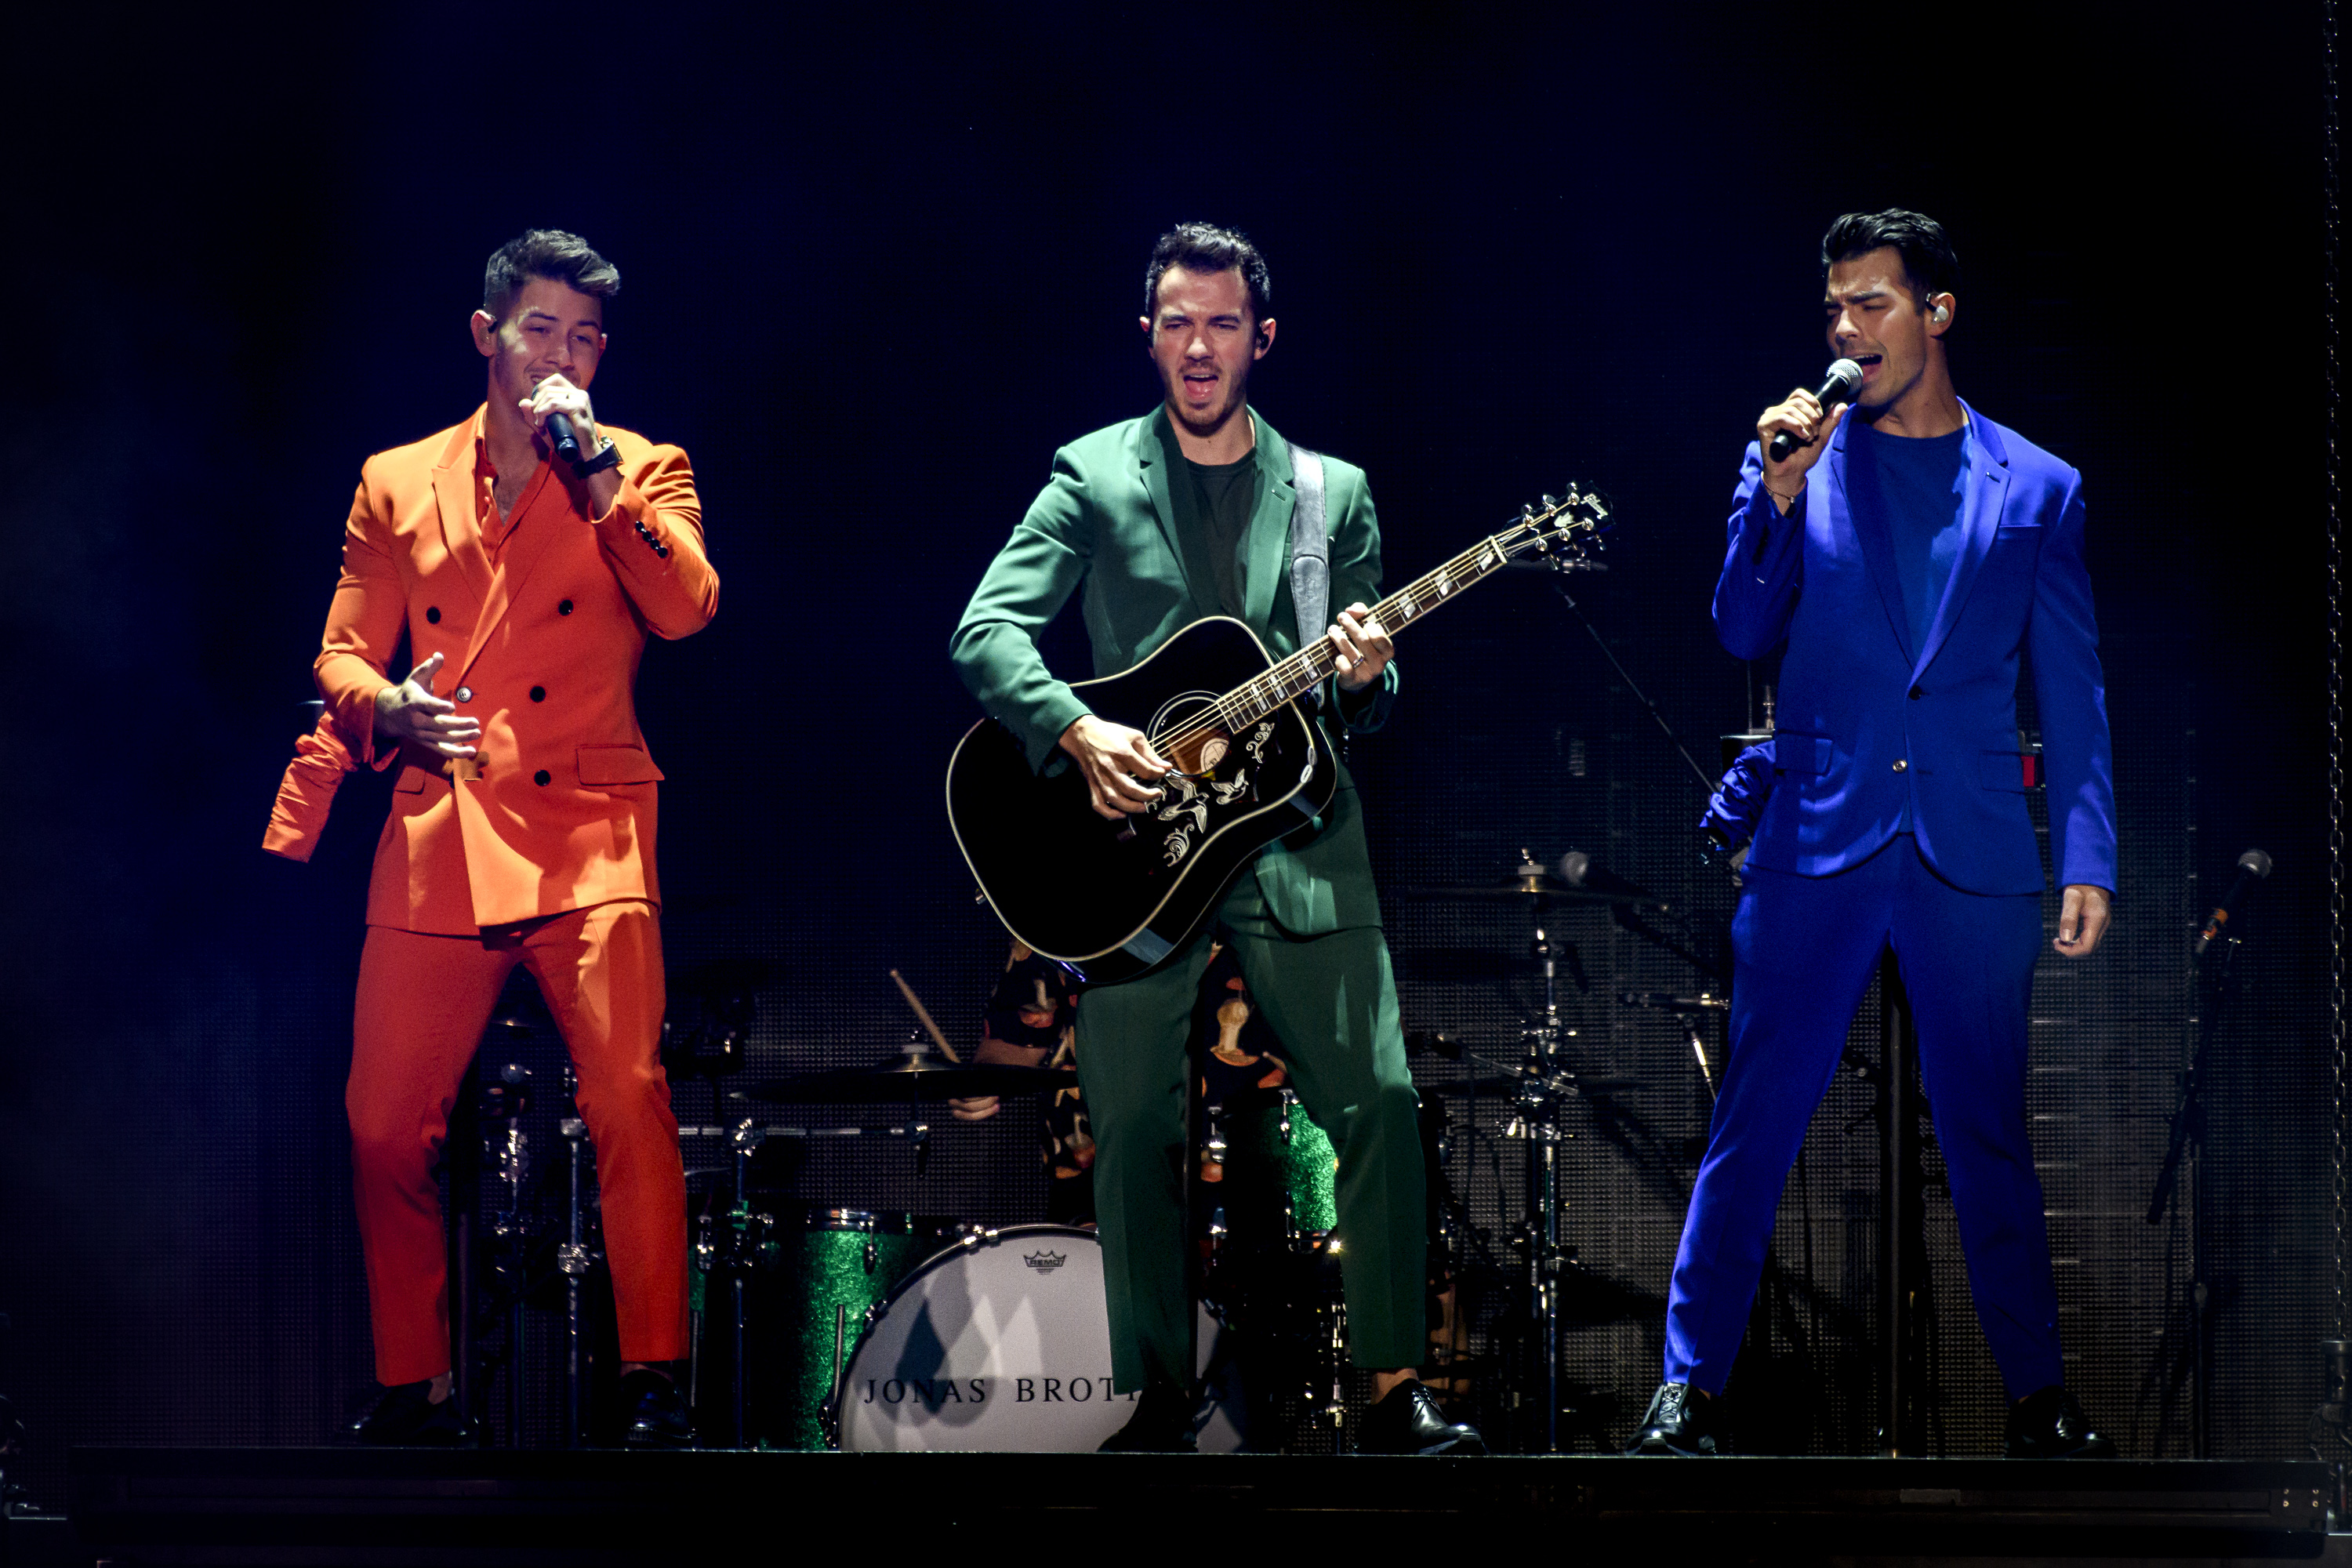 A photo of the Jonas Brothers performing on stage in multi-colored suits.